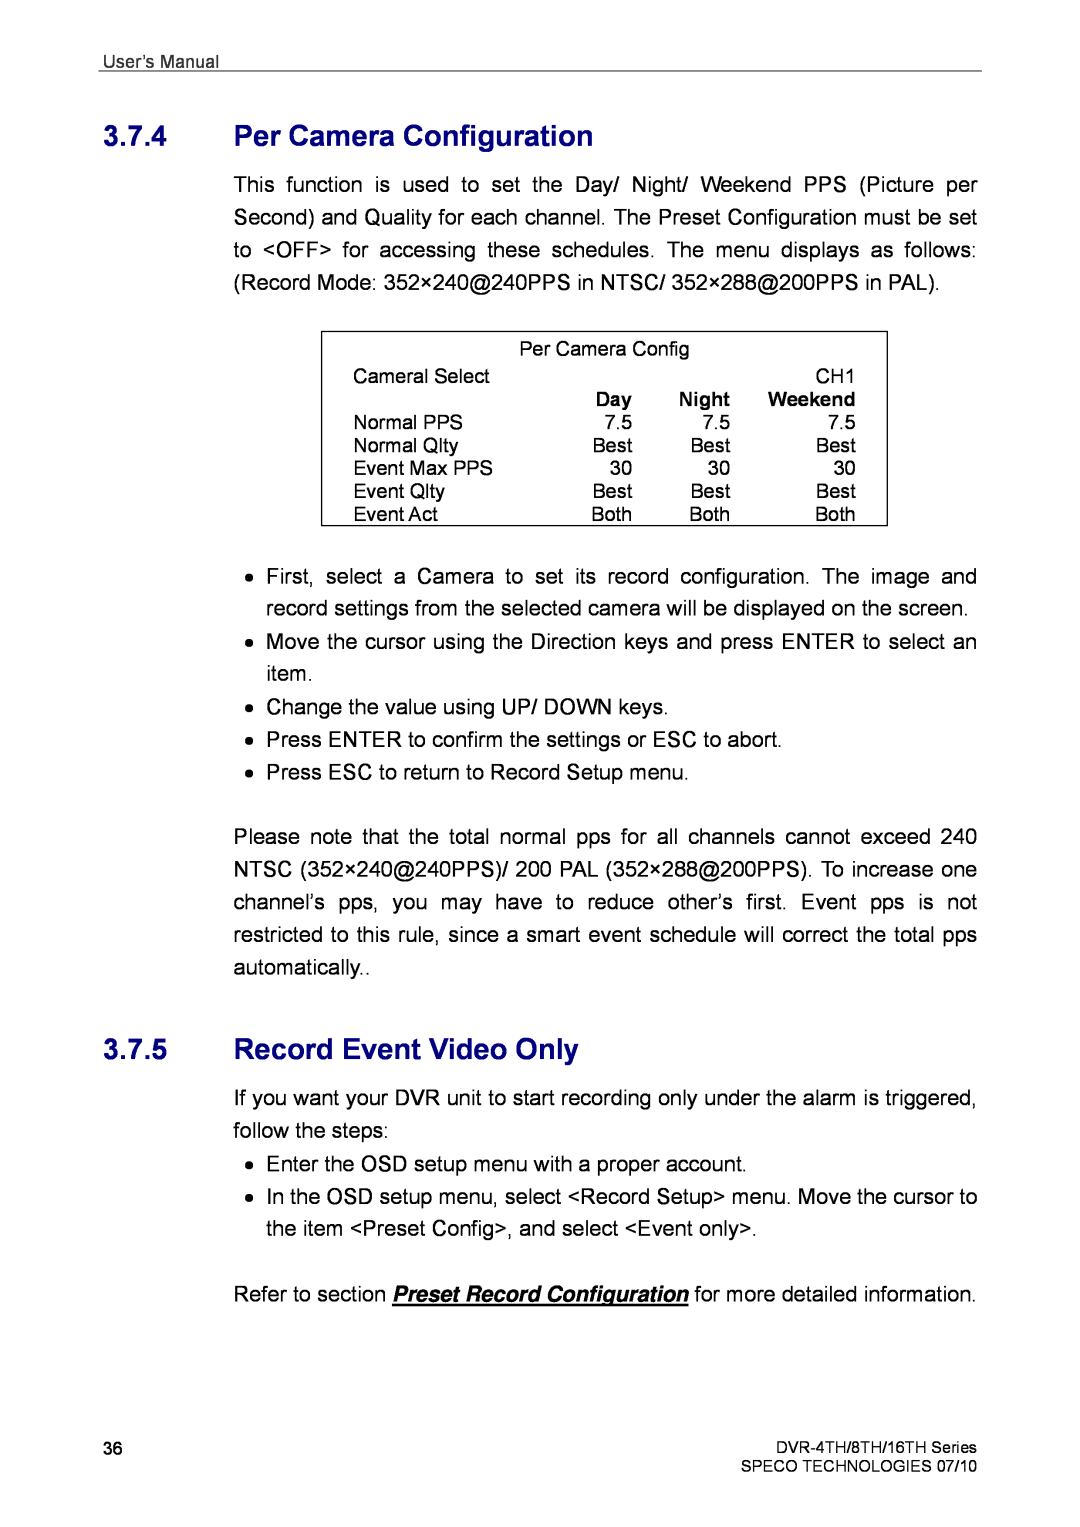 Speco Technologies 4TH, 8TH, 16TH user manual Per Camera Configuration, Record Event Video Only 